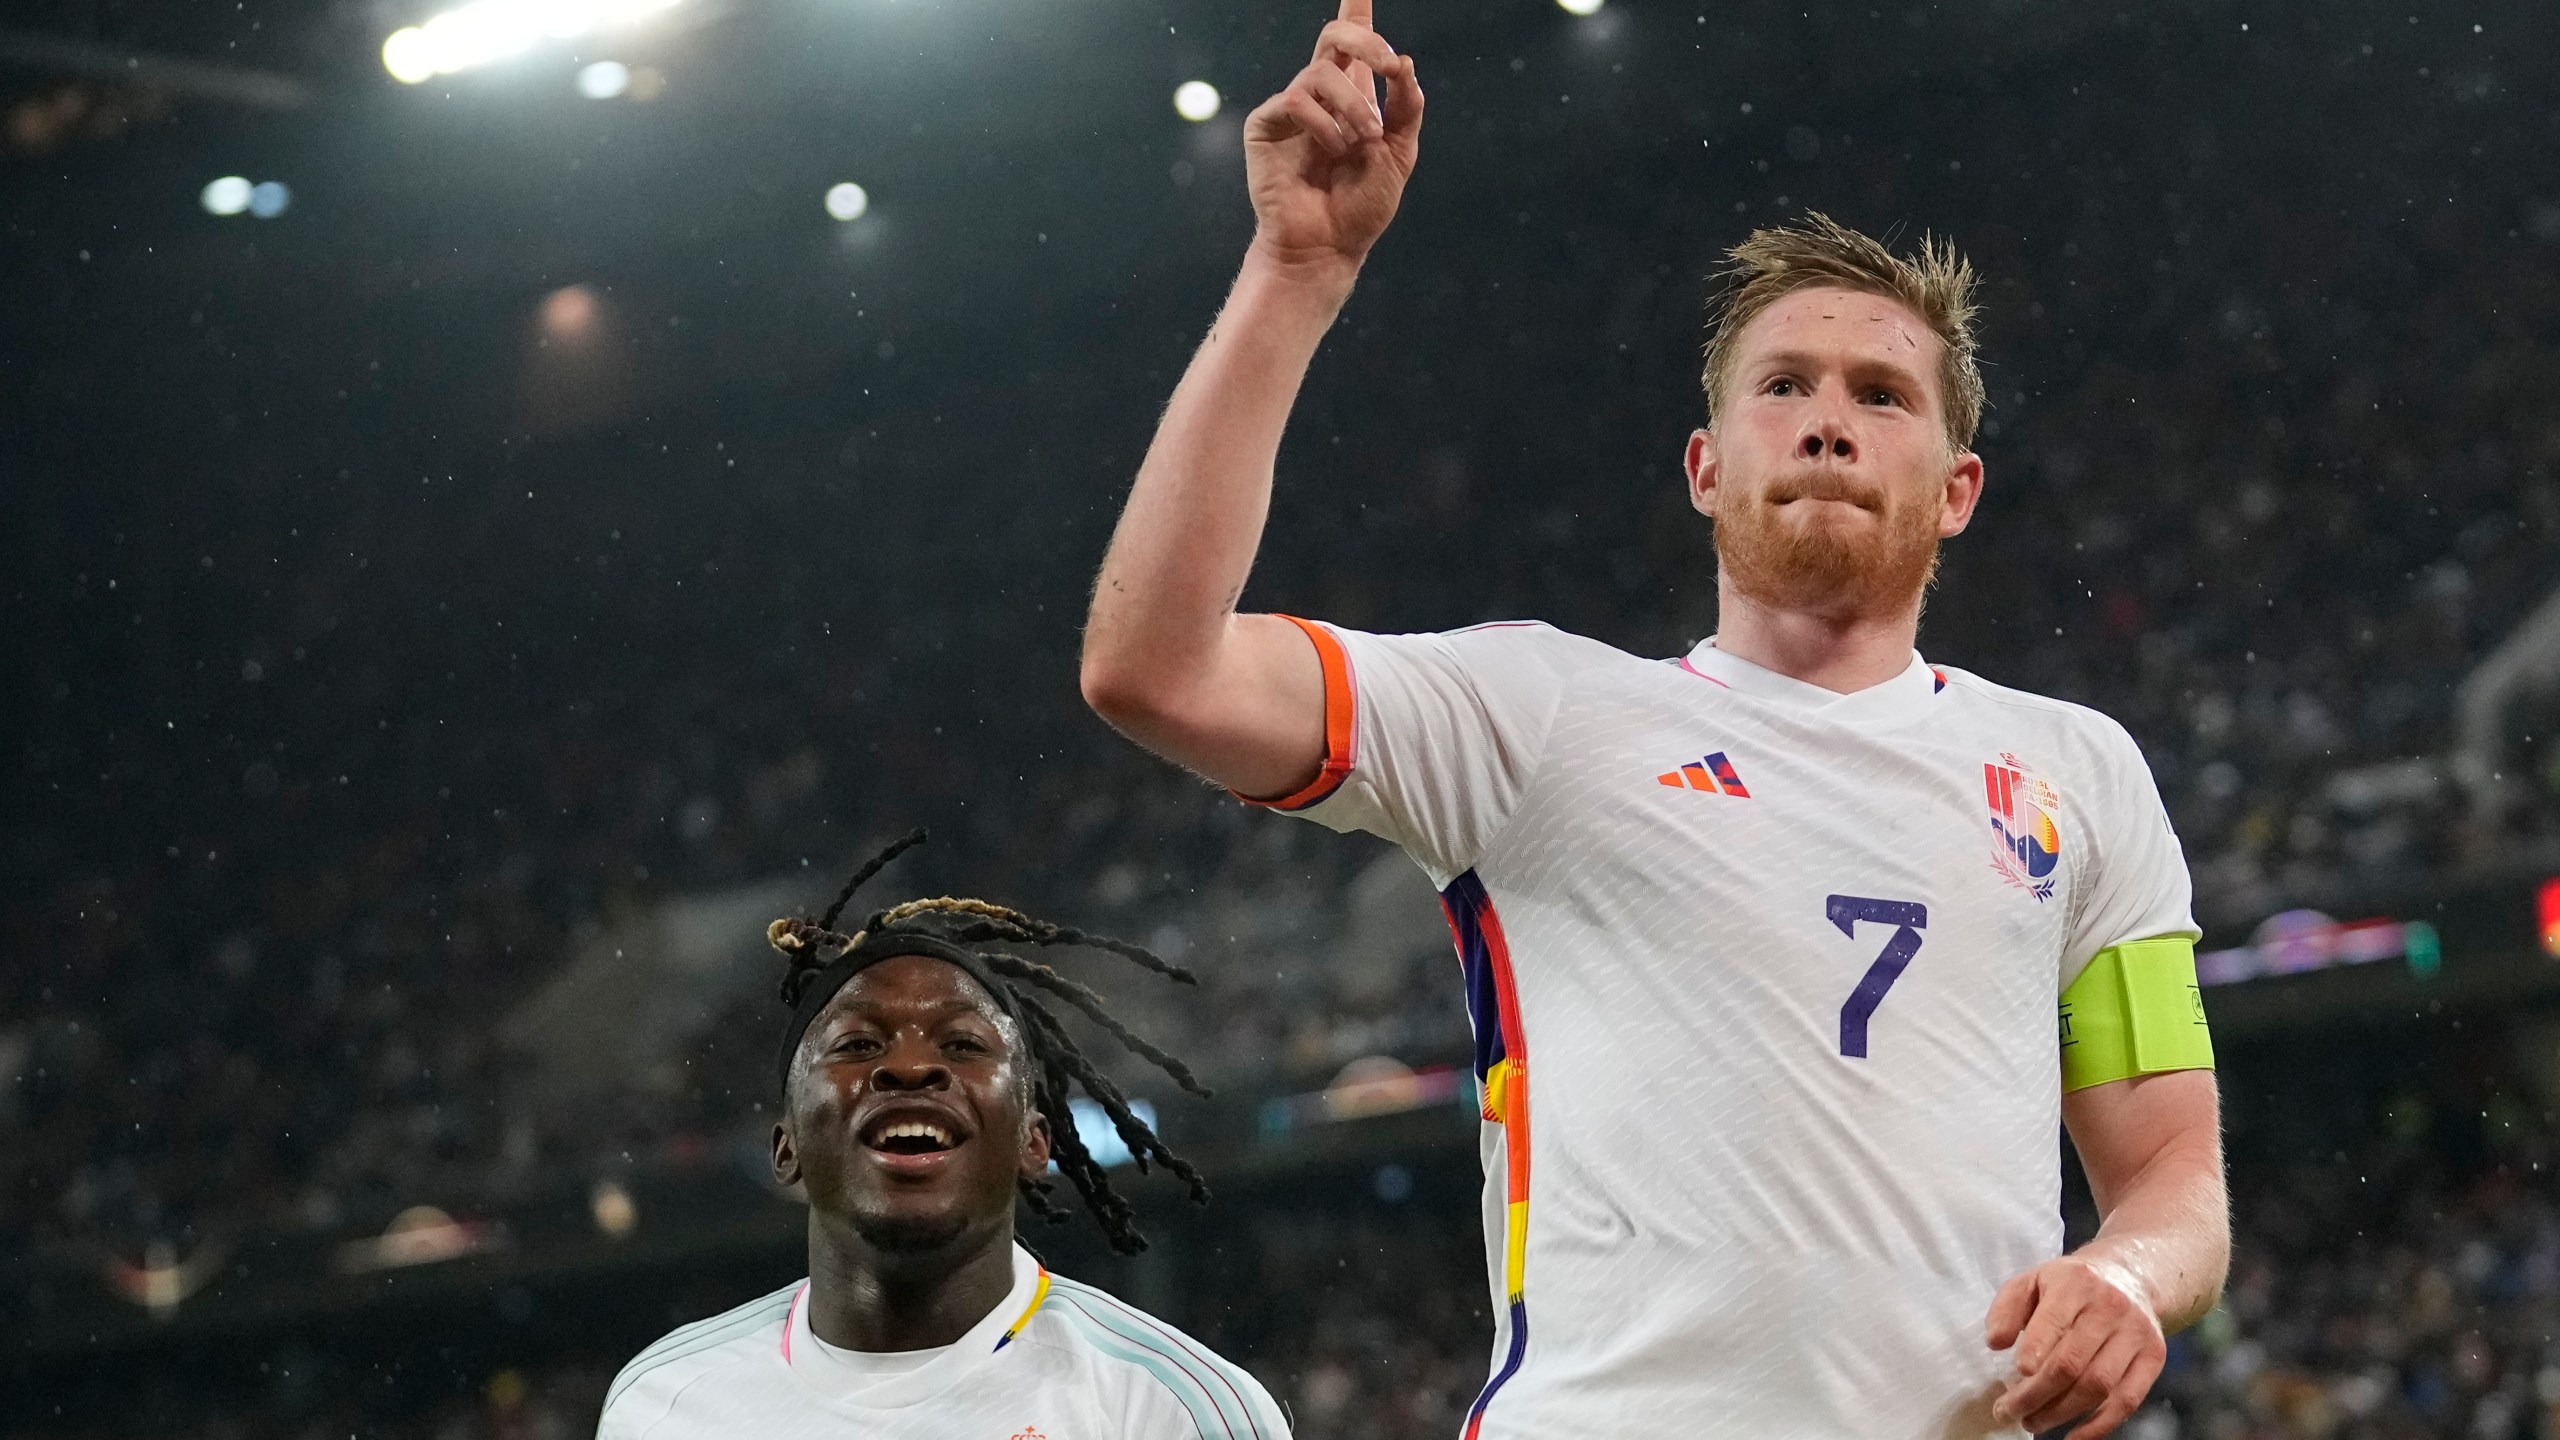 FILE - Belgium's Kevin De Bruyne, right, celebrates after scoring the third goal against Germany during the international friendly soccer match between Germany and Belgium in Cologne, Germany, on March 28, 2023. The Belgium international players taking part in the Euro soccer tournament this summer could well resemble a world-famous reporter. According to leaks on various specialized websites, the Belgium Euro 2024 away kit is a tribute to Tintin. The Belgian federation is set to unveil the new kit on Thursday March 14, 2024 during a press conference at the Hergé Museum. (AP Photo/Martin Meissner, File)